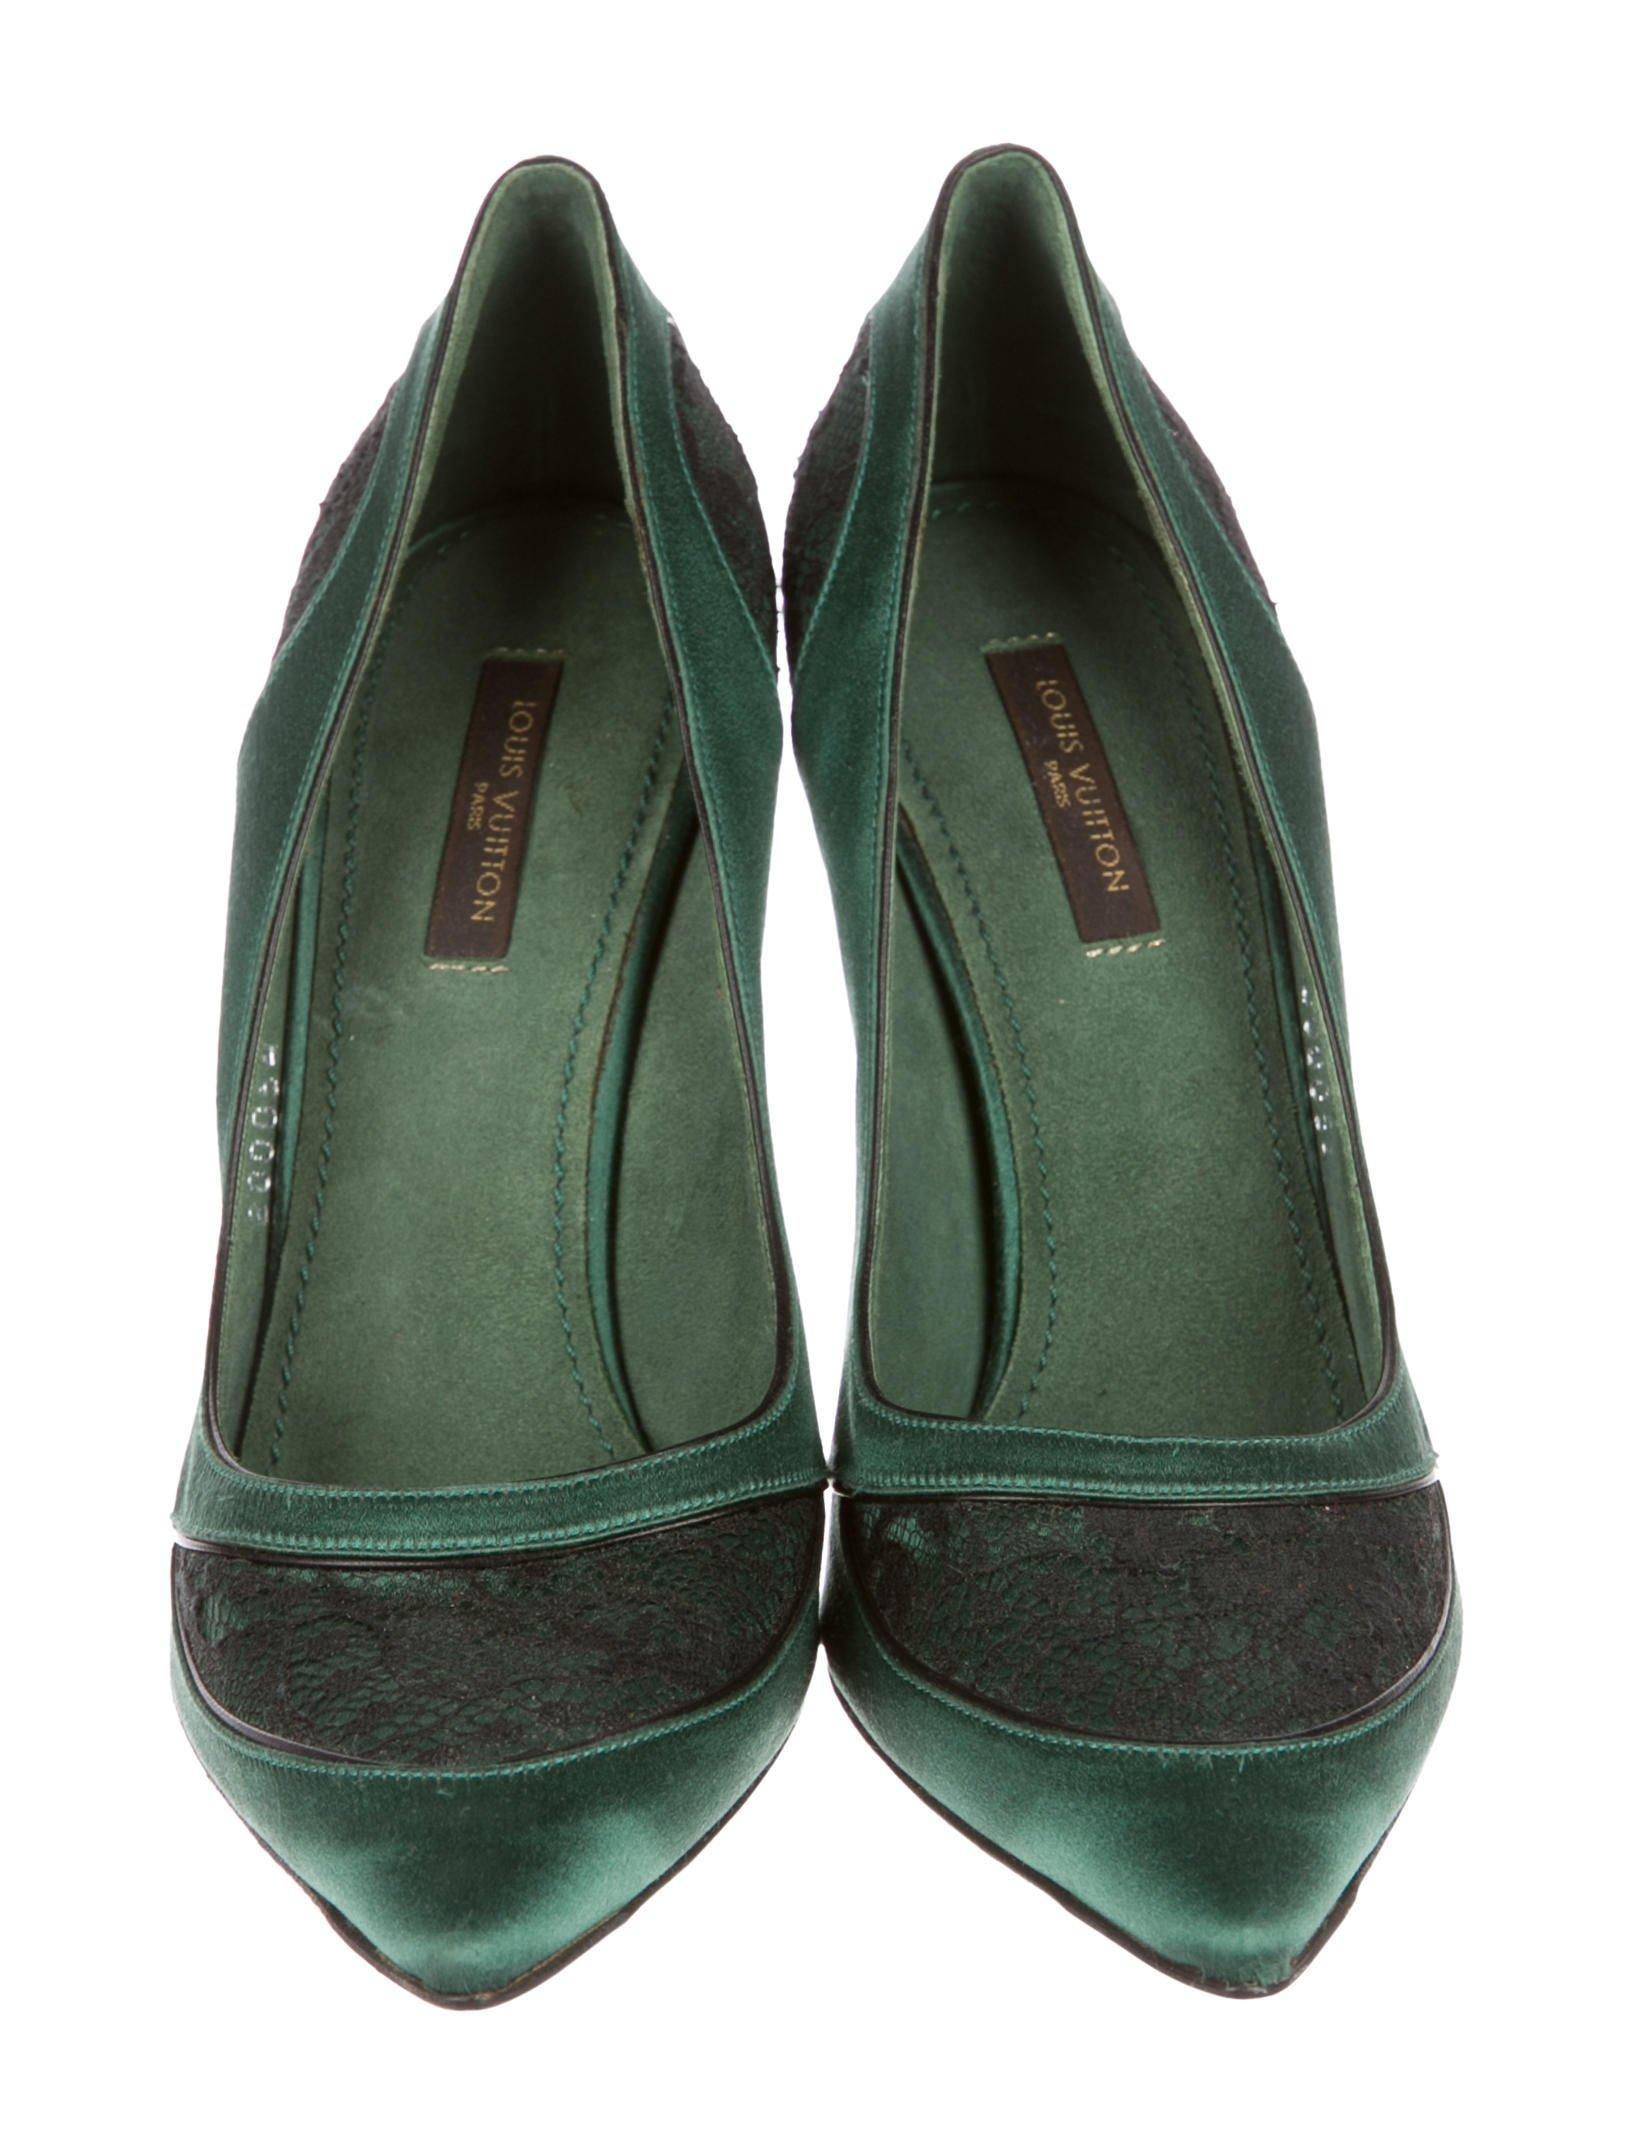 Louis Vuitton New Satin Emerald Black Evening Heels Pumps 

Size IT 36.5
Satin
Lace
Made in Italy
Heel height 4